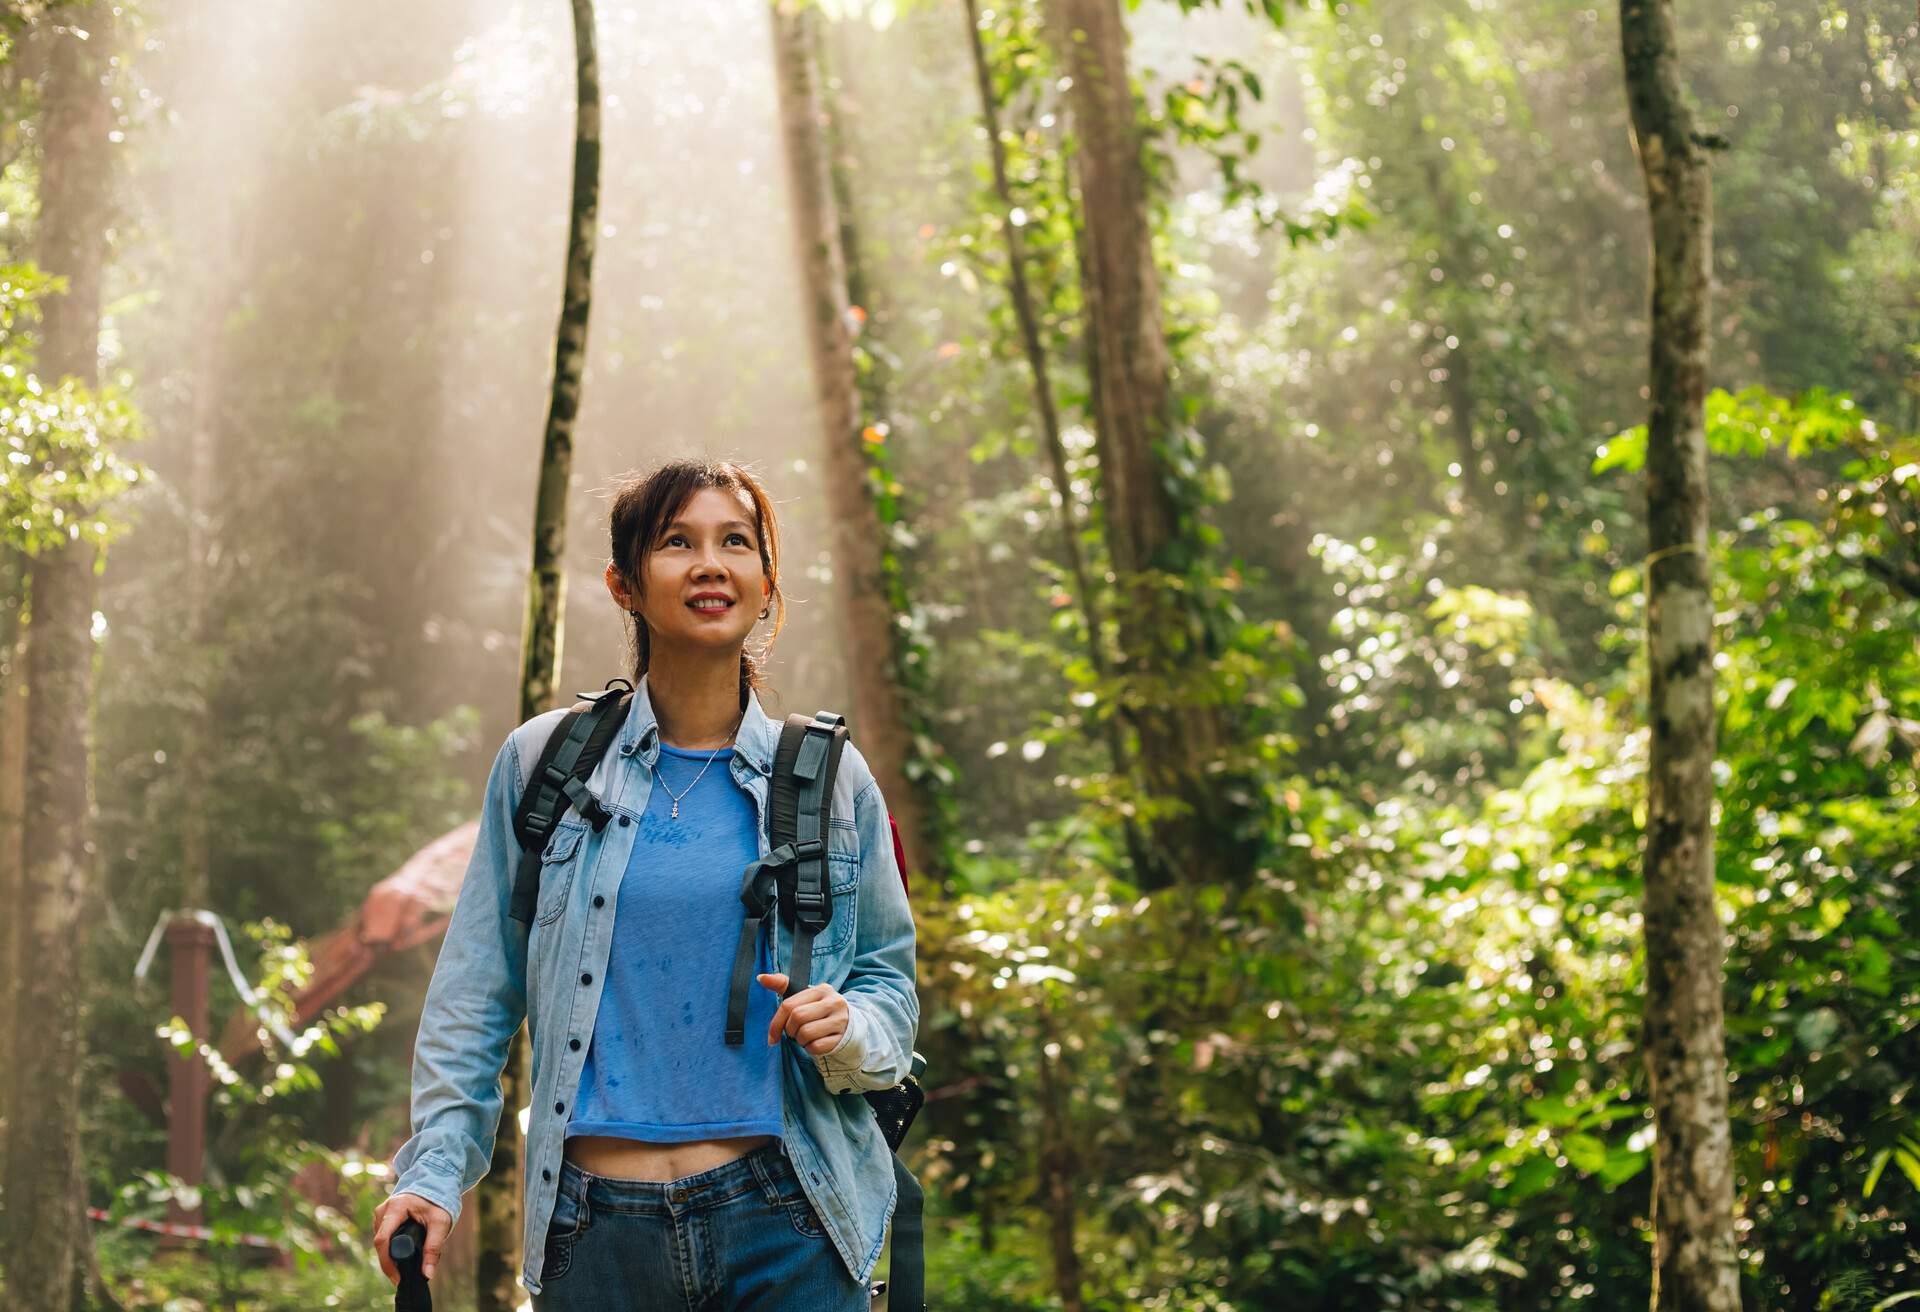 Woman with backpack exploring nature outdoor in tropical rainforest  and enjoying nature.